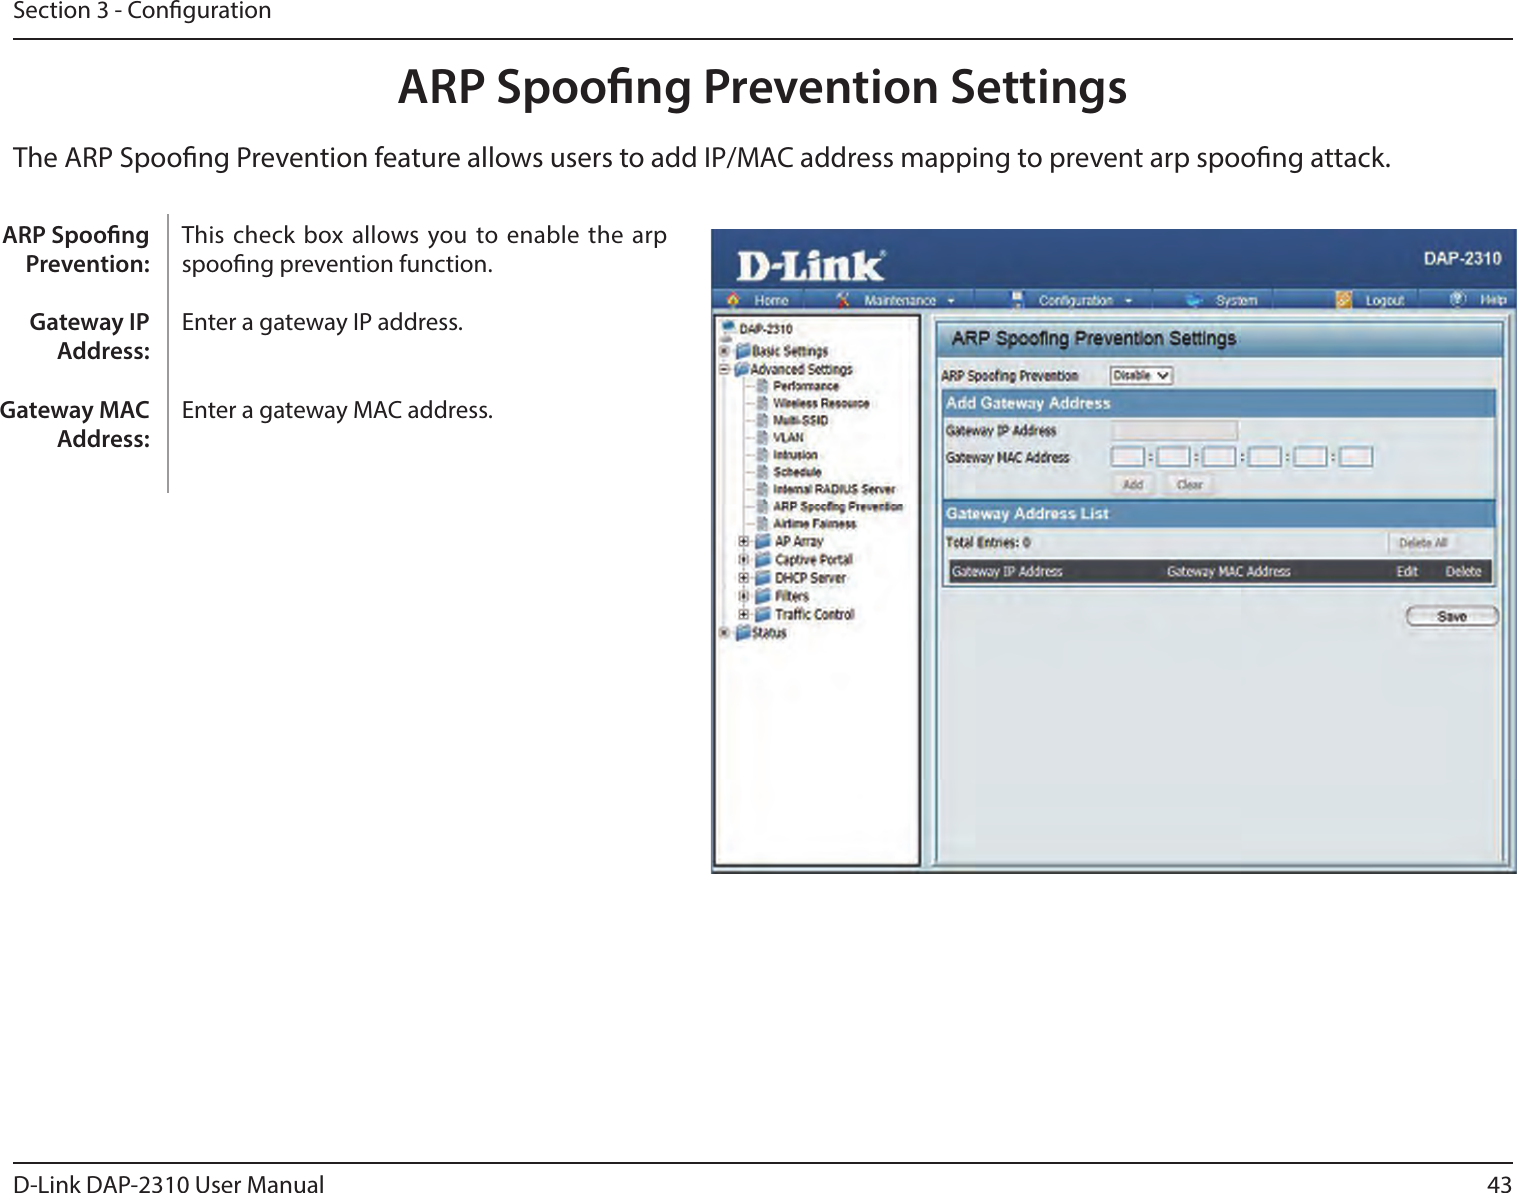 43D-Link DAP-2310 User ManualSection 3 - CongurationARP Spoong Prevention SettingsThe ARP Spoong Prevention feature allows users to add IP/MAC address mapping to prevent arp spoong attack.This check  box allows you to enable  the arp spoong prevention function.  Enter a gateway IP address. Enter a gateway MAC address. ARP Spoong Prevention:Gateway IP Address:Gateway MAC Address: